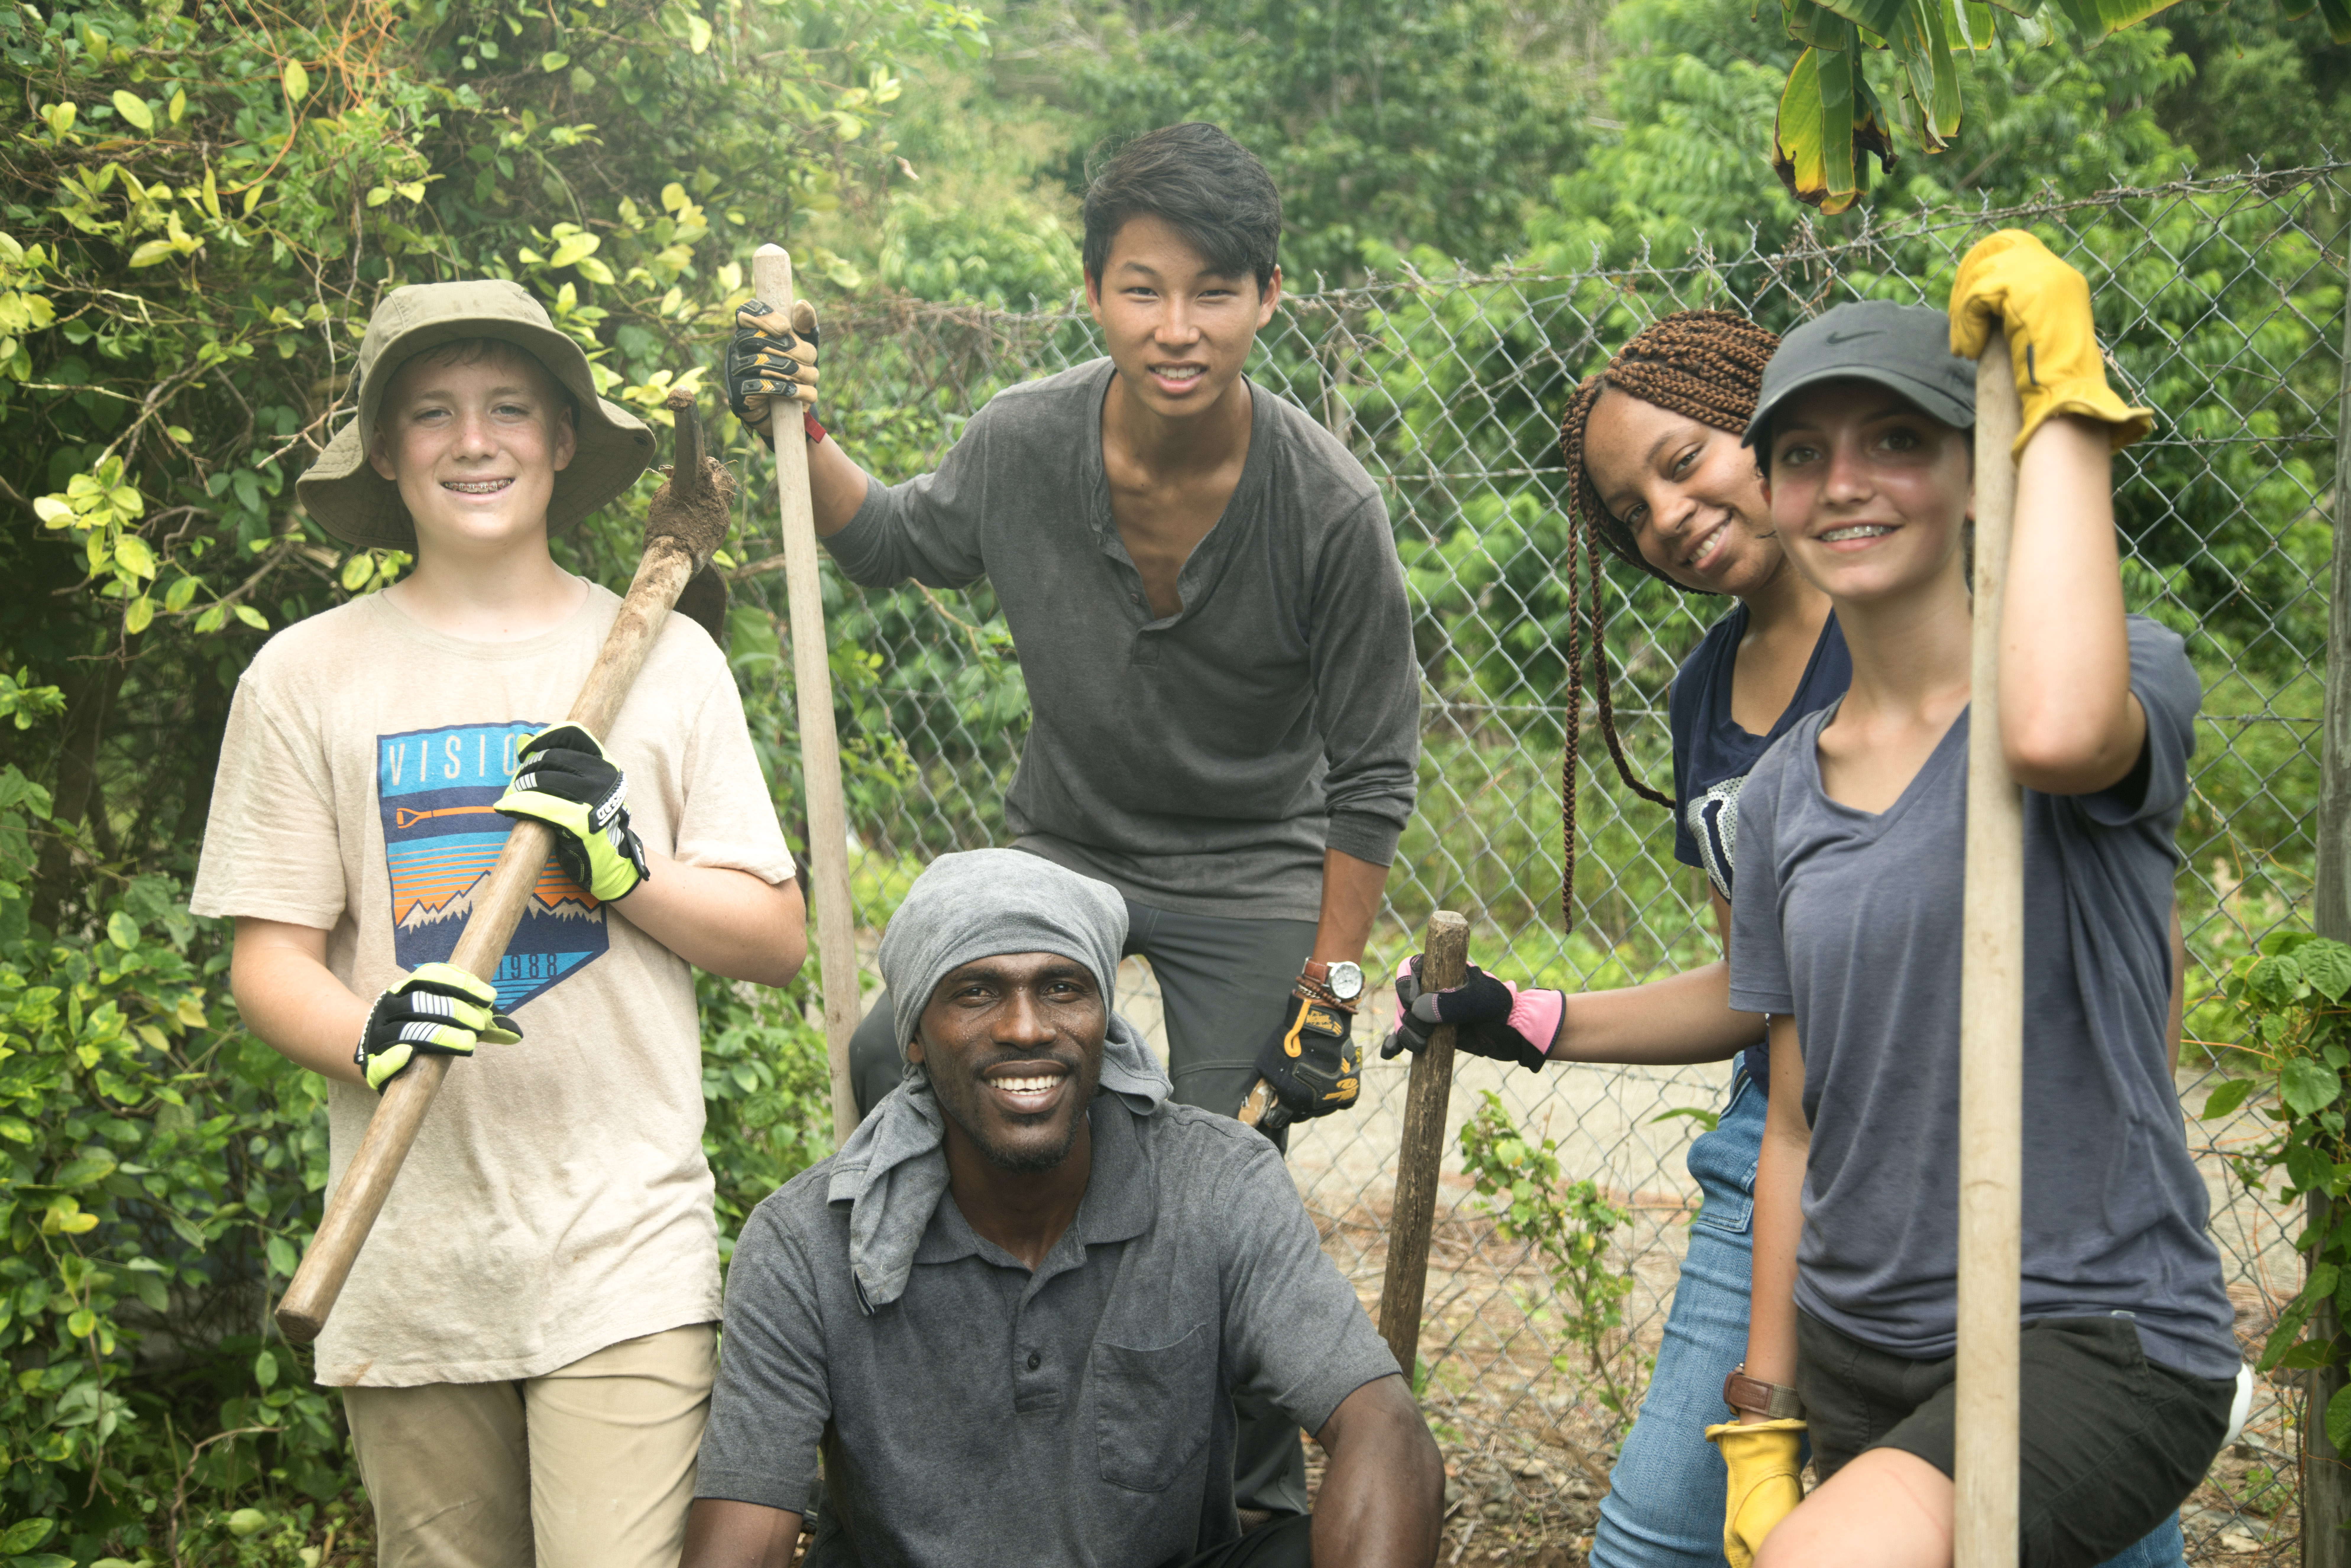 VISIONS teen volunteers and BVI community member pause working for a photo in the garden